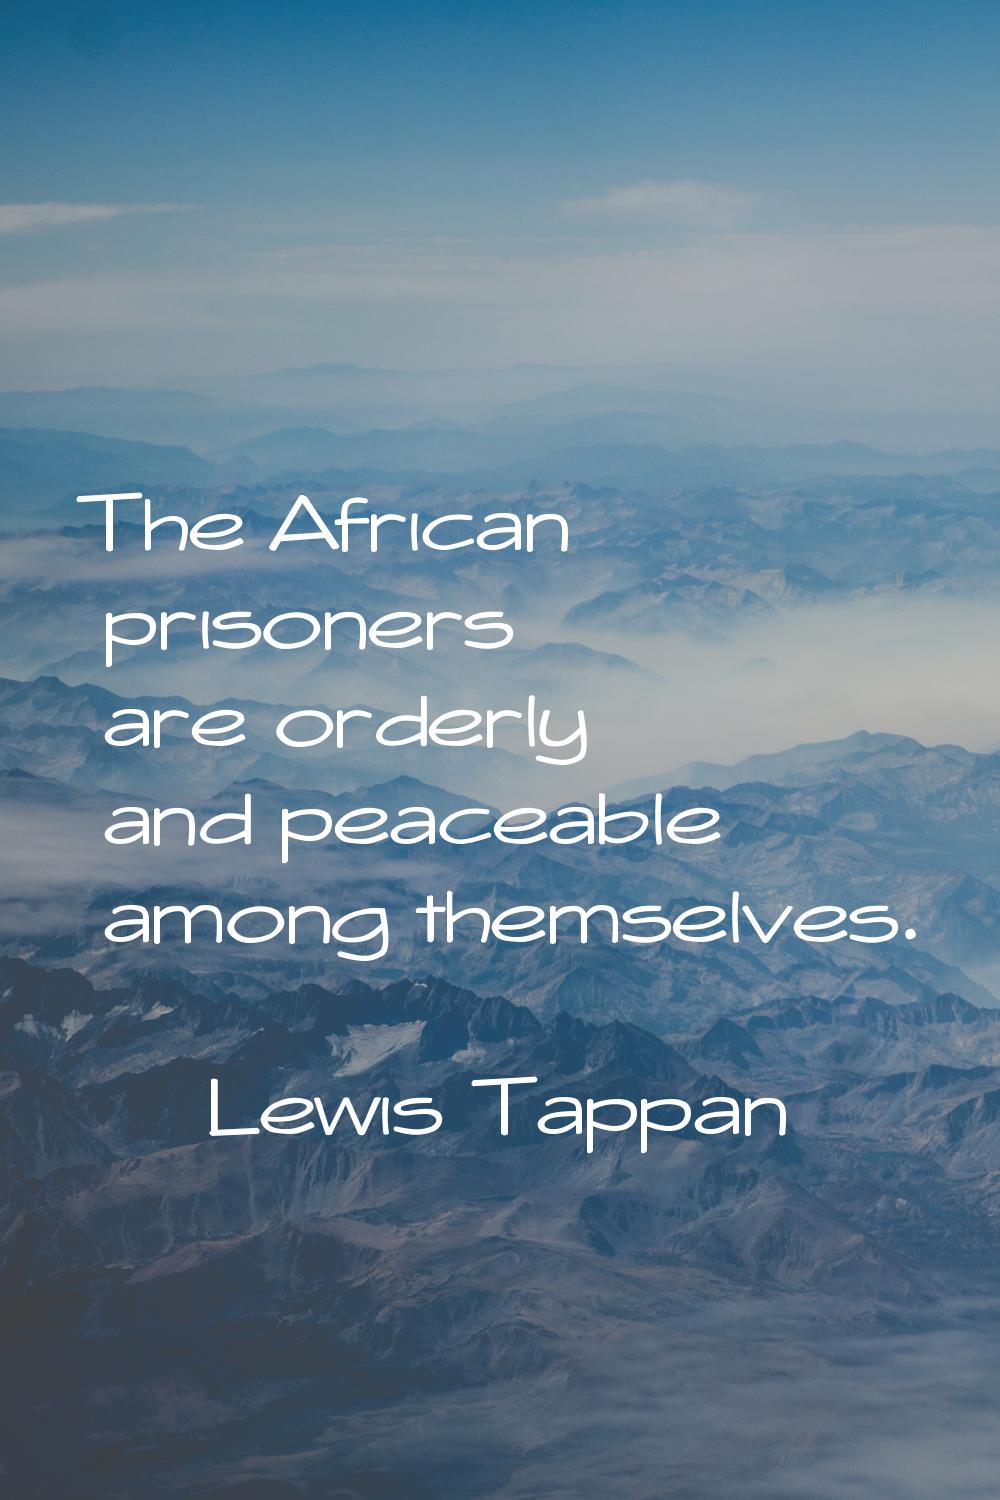 The African prisoners are orderly and peaceable among themselves.